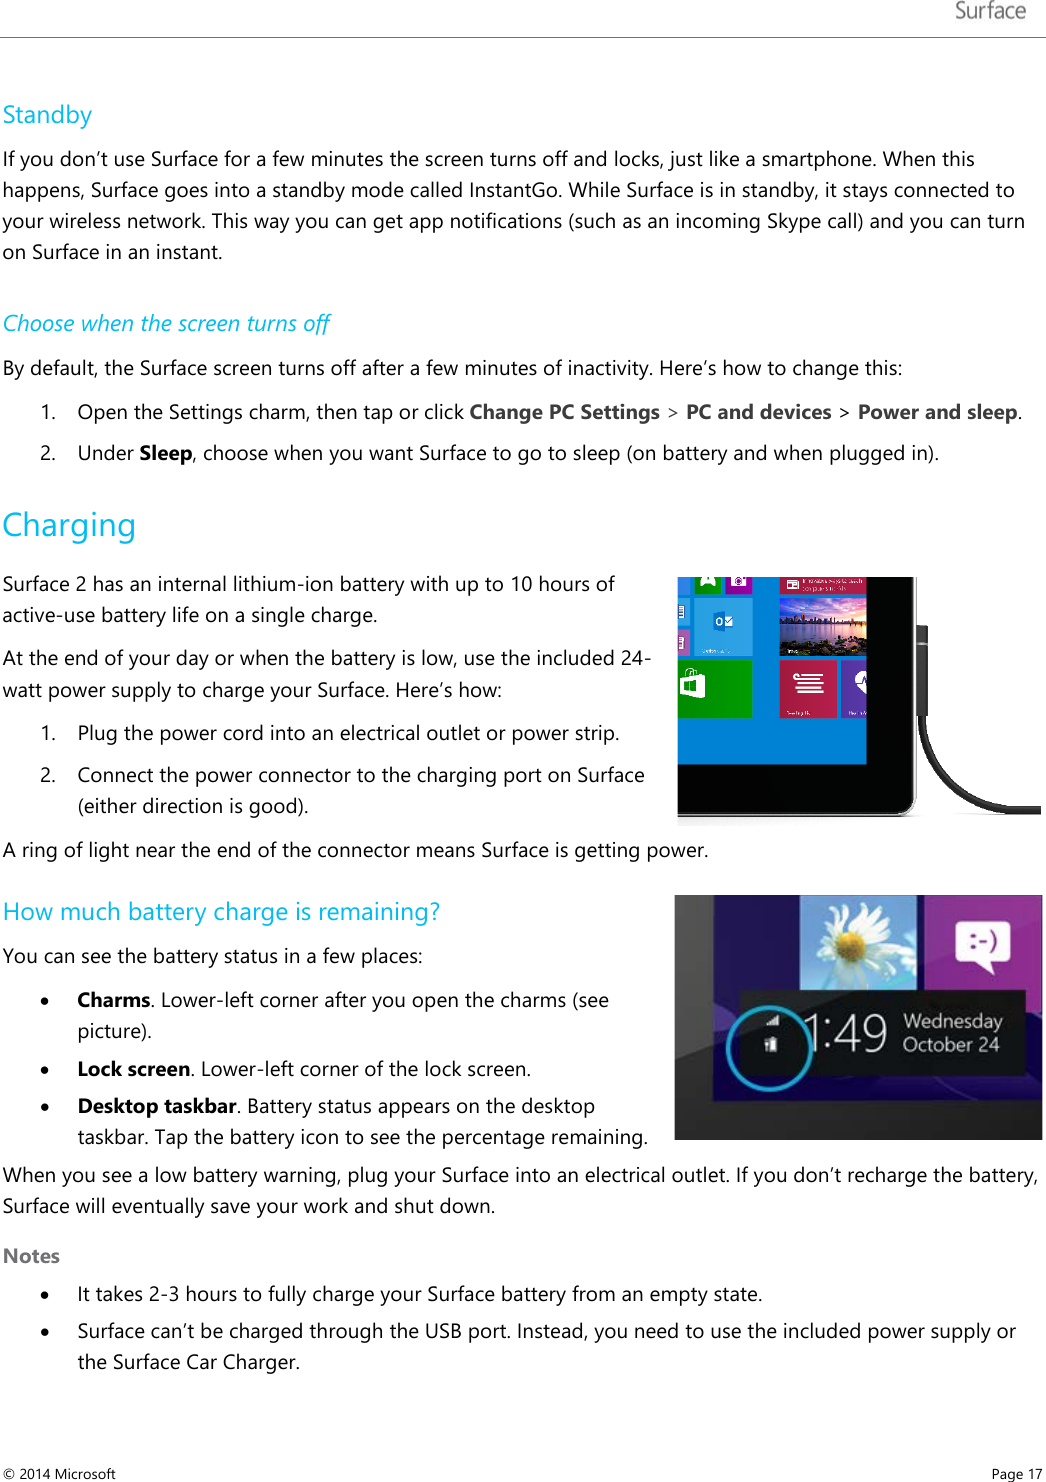   Standby  If you don’t use Surface for a few minutes the screen turns off and locks, just like a smartphone. When this happens, Surface goes into a standby mode called InstantGo. While Surface is in standby, it stays connected to your wireless network. This way you can get app notifications (such as an incoming Skype call) and you can turn on Surface in an instant.  Choose when the screen turns off By default, the Surface screen turns off after a few minutes of inactivity. Here’s how to change this:  1. Open the Settings charm, then tap or click Change PC Settings &gt; PC and devices &gt; Power and sleep. 2. Under Sleep, choose when you want Surface to go to sleep (on battery and when plugged in).  Charging Surface 2 has an internal lithium-ion battery with up to 10 hours of active-use battery life on a single charge. At the end of your day or when the battery is low, use the included 24-watt power supply to charge your Surface. Here’s how: 1. Plug the power cord into an electrical outlet or power strip. 2. Connect the power connector to the charging port on Surface (either direction is good).  A ring of light near the end of the connector means Surface is getting power.  How much battery charge is remaining? You can see the battery status in a few places:  • Charms. Lower-left corner after you open the charms (see picture).  • Lock screen. Lower-left corner of the lock screen.  • Desktop taskbar. Battery status appears on the desktop taskbar. Tap the battery icon to see the percentage remaining.  When you see a low battery warning, plug your Surface into an electrical outlet. If you don’t recharge the battery, Surface will eventually save your work and shut down. Notes • It takes 2-3 hours to fully charge your Surface battery from an empty state. • Surface can’t be charged through the USB port. Instead, you need to use the included power supply or the Surface Car Charger.  © 2014 Microsoft     Page 17  